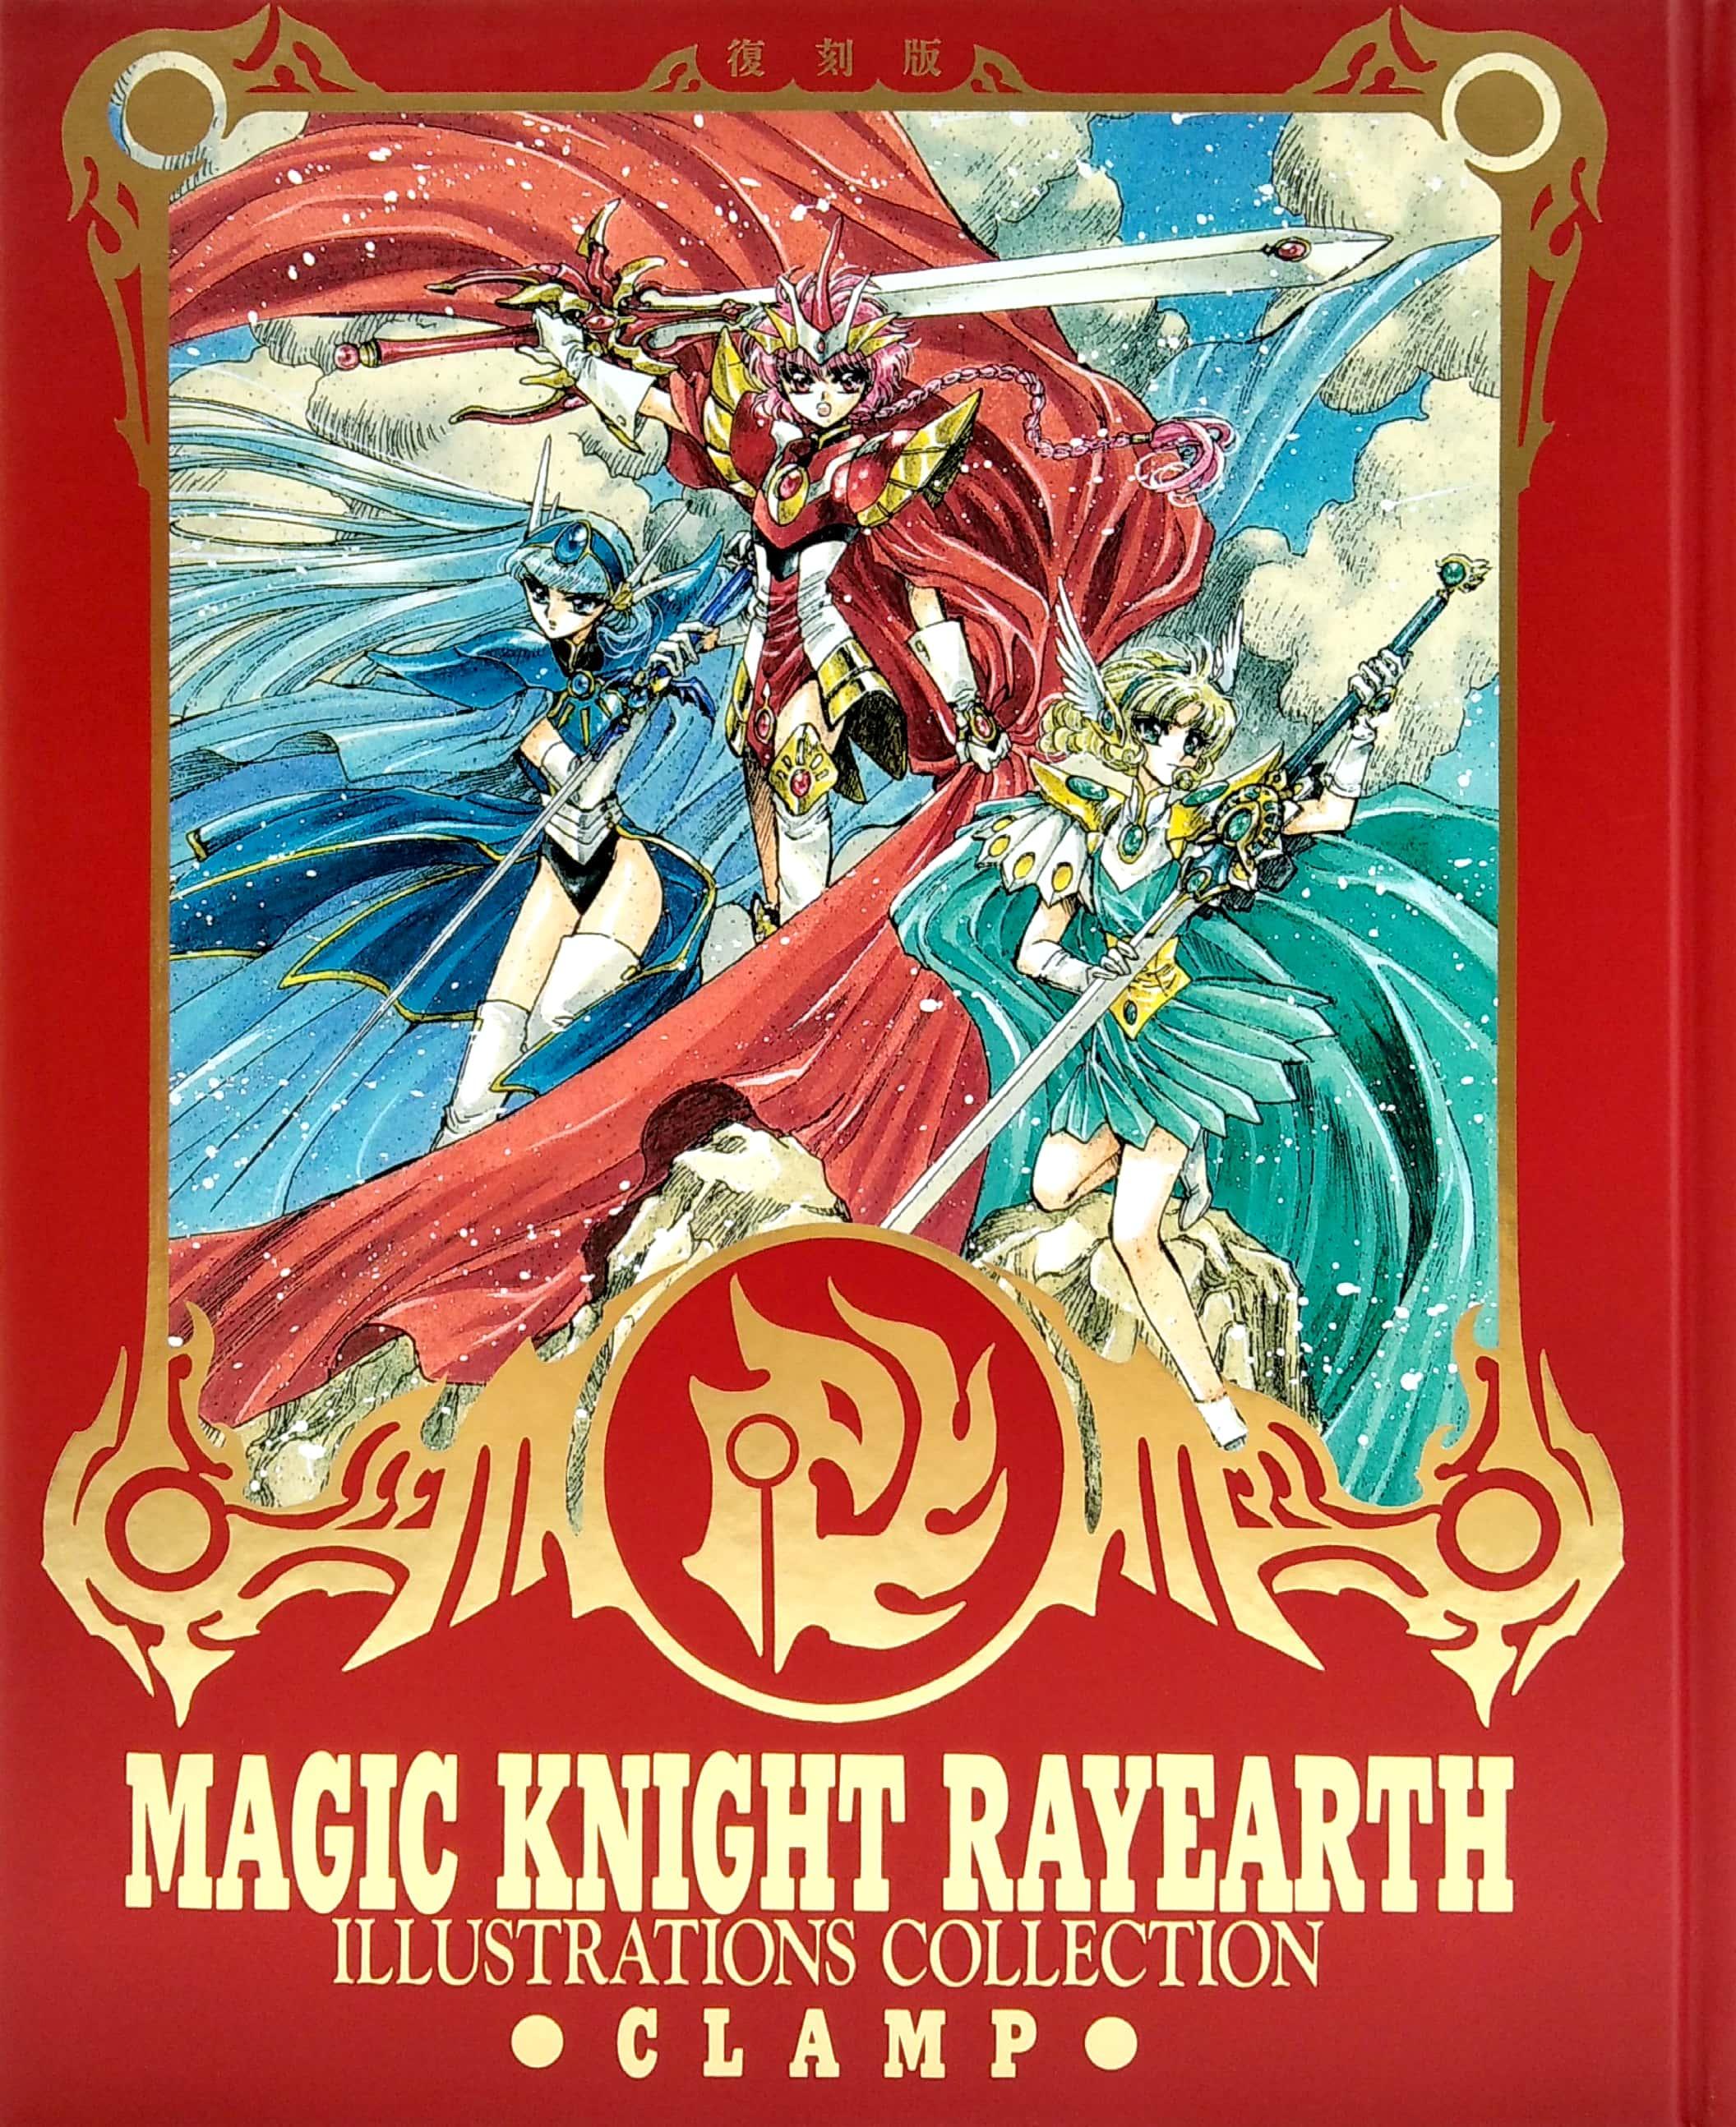 Magic Knight Rayearth - Illustrations Collection (Japanese Edition)